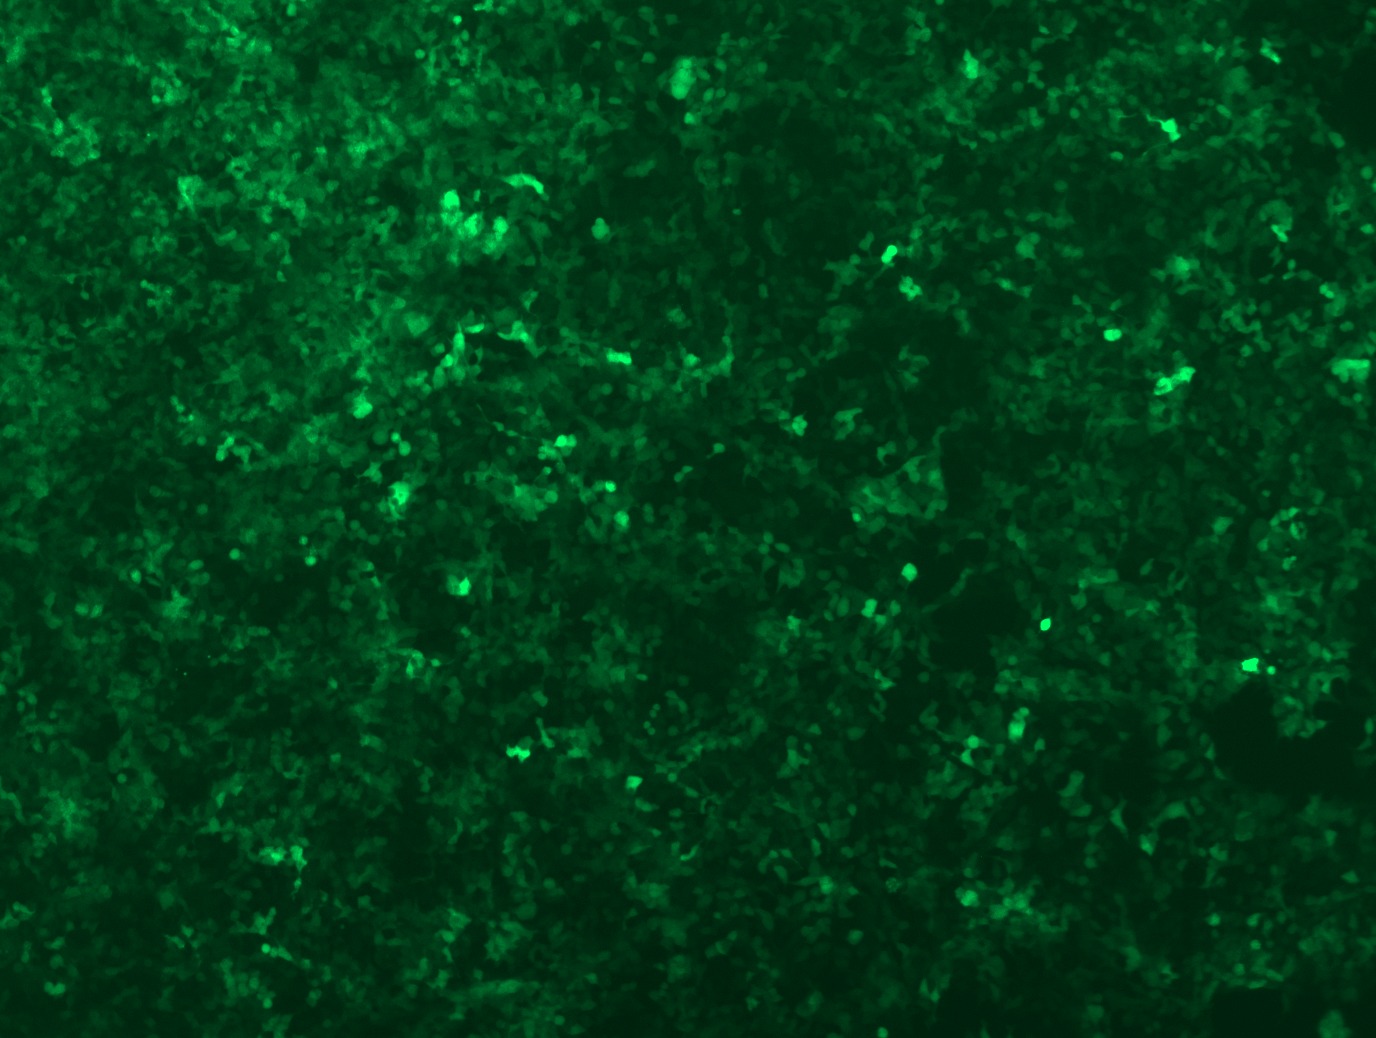 GFP signal was observed under microscope at 48 hours after transduction of TL507422B virus into HEK293 cells. TL507422B virus was prepared using lenti-shRNA TL507422B and TR30037 packaging kit.